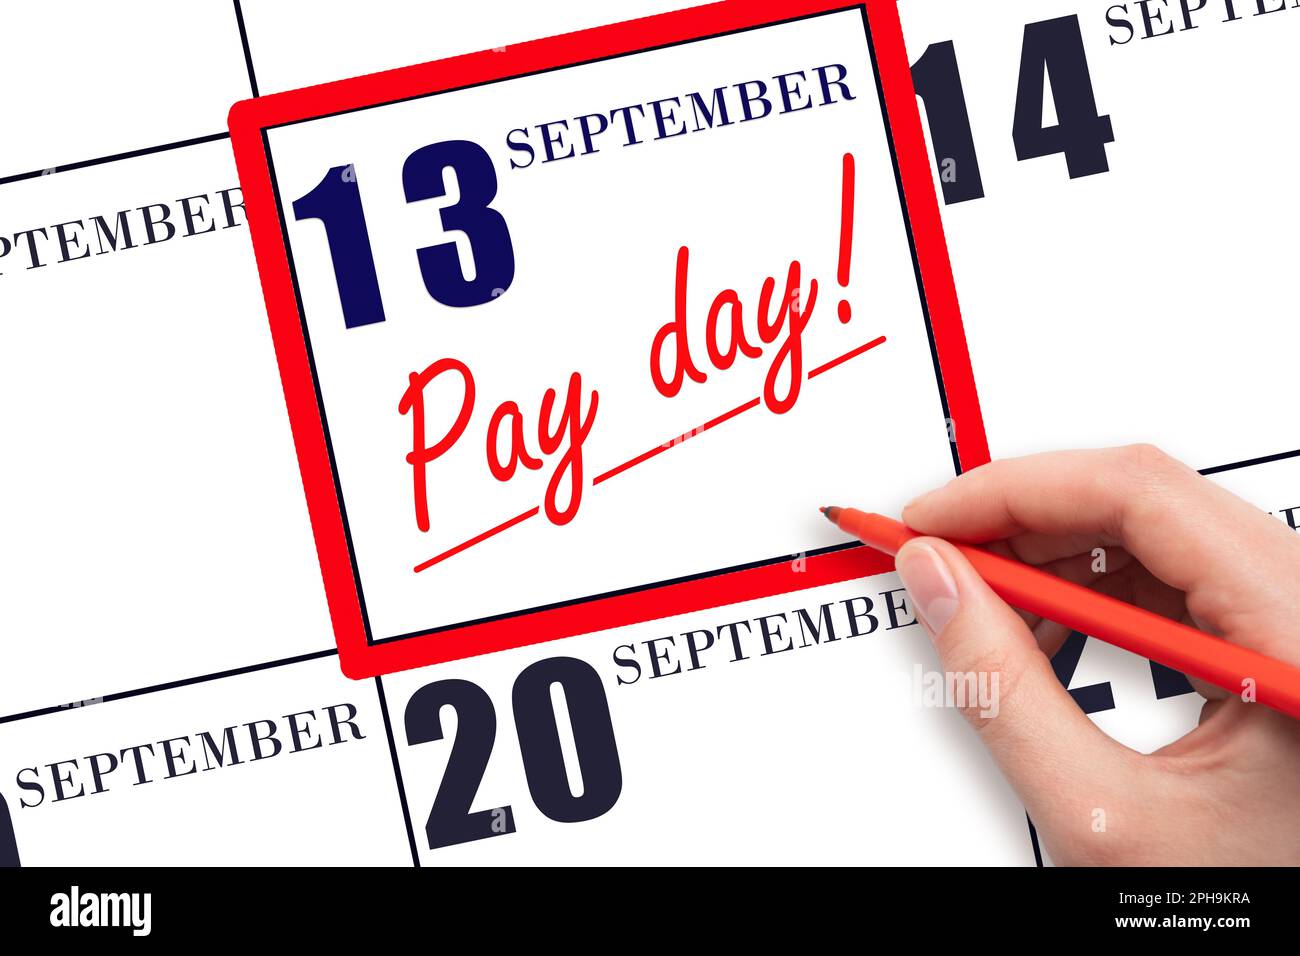 13th day of September. Hand writing text PAY DATE on calendar date September 13 and underline it. Payment due date. Reminder concept of payment. Autum Stock Photo